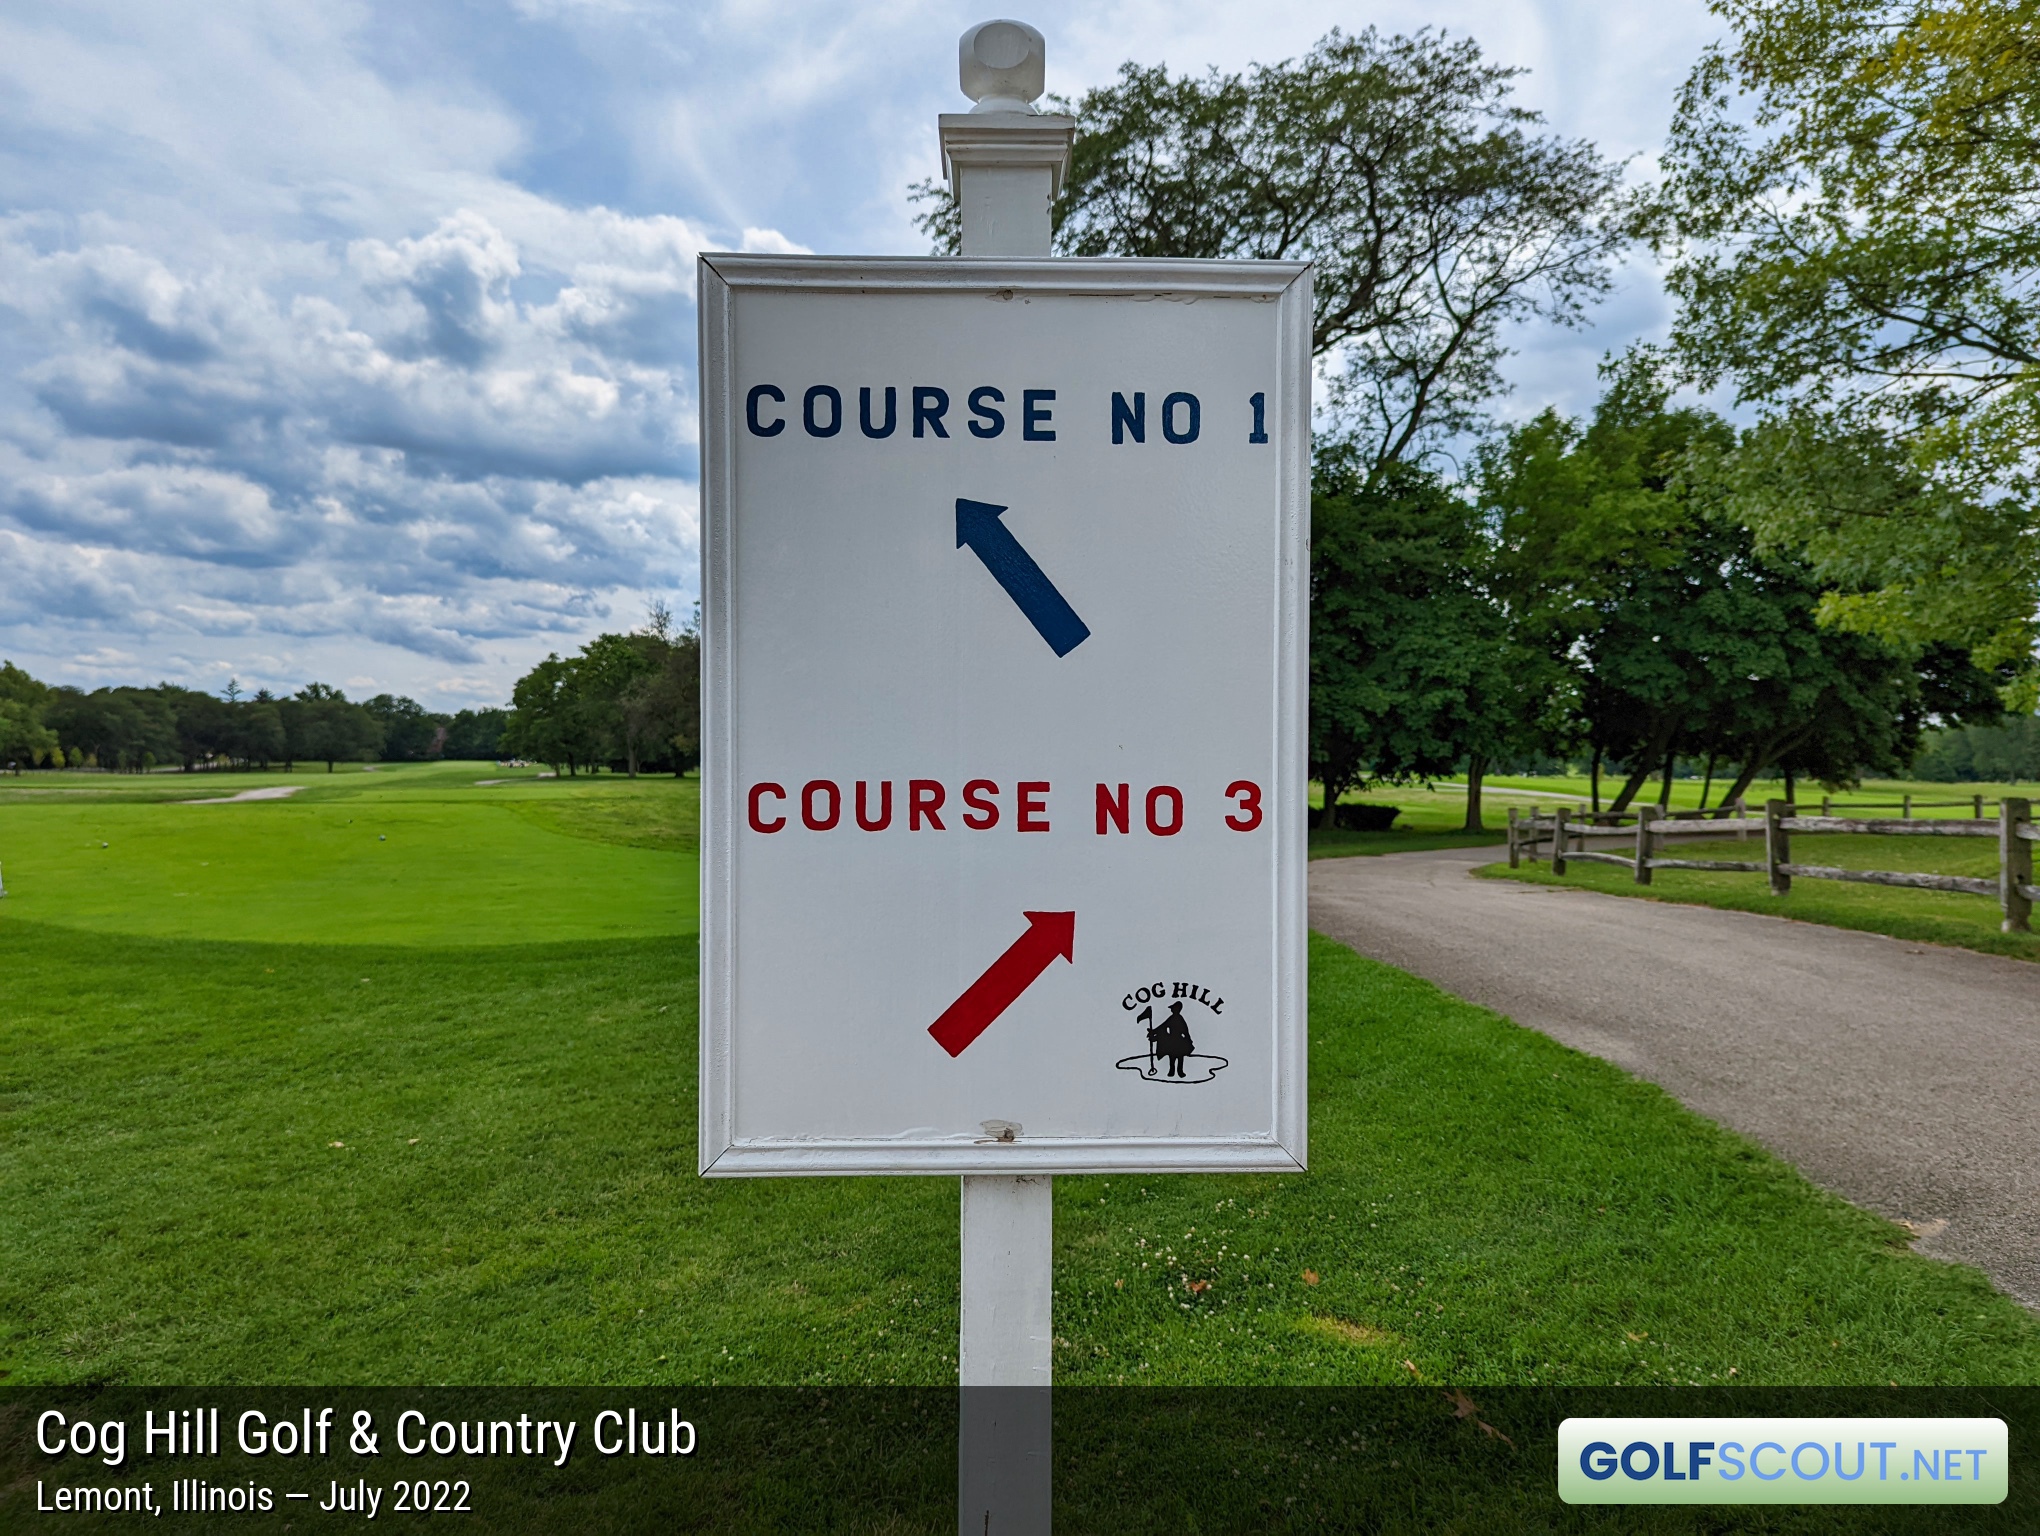 Miscellaneous photo of Cog Hill Course #1 in Lemont, Illinois. Cog has smartly adopted a consistent color scheme for their courses. Course #1 always has blue signage, on course, in the scorecard, etc. Course #3 is red.